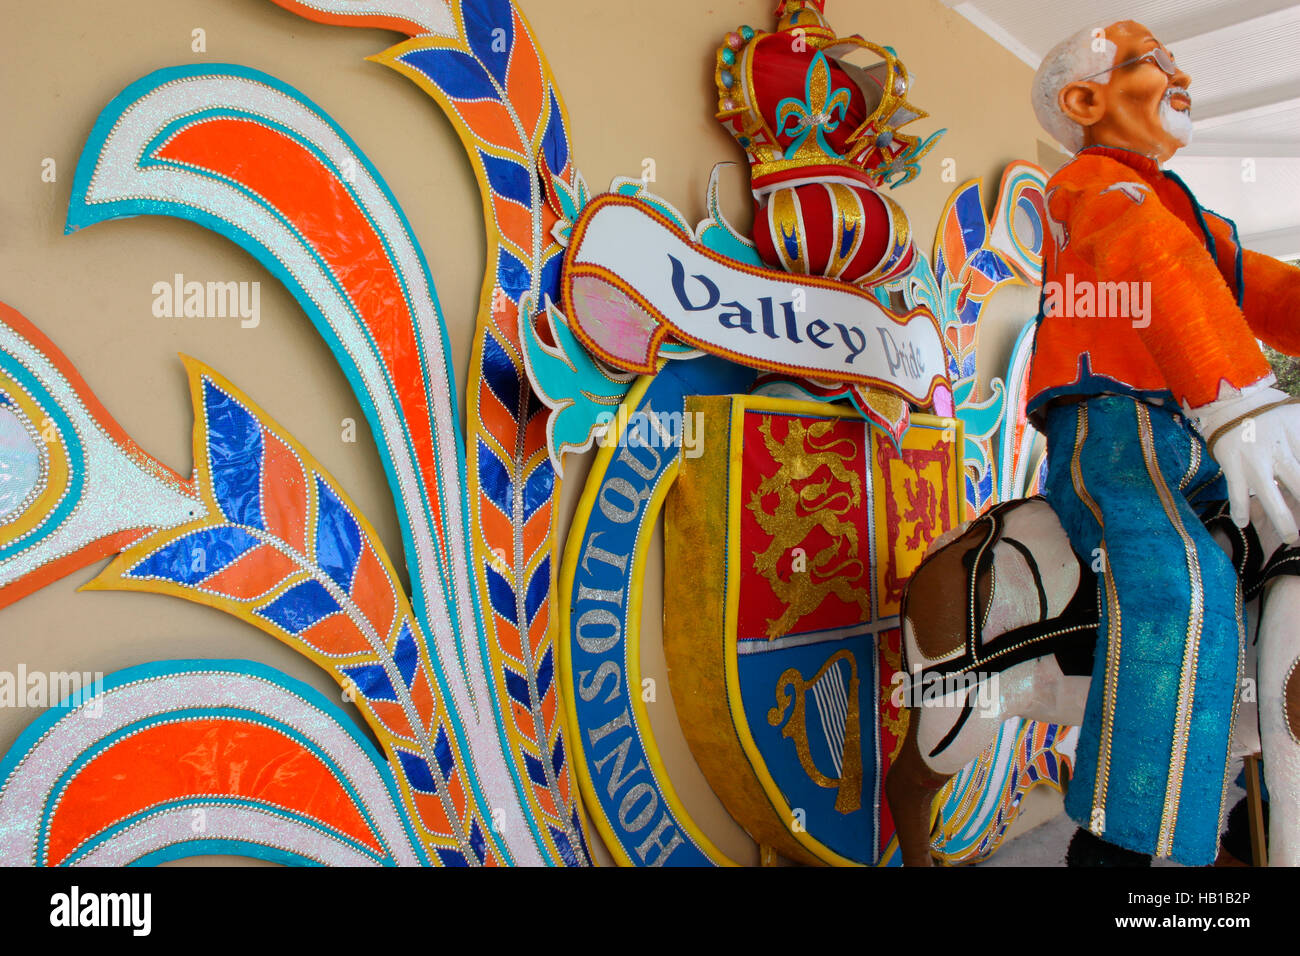 Junkanoo exhibit at the National Gallery of the West Indies, Nassau, The Bahamas Stock Photo